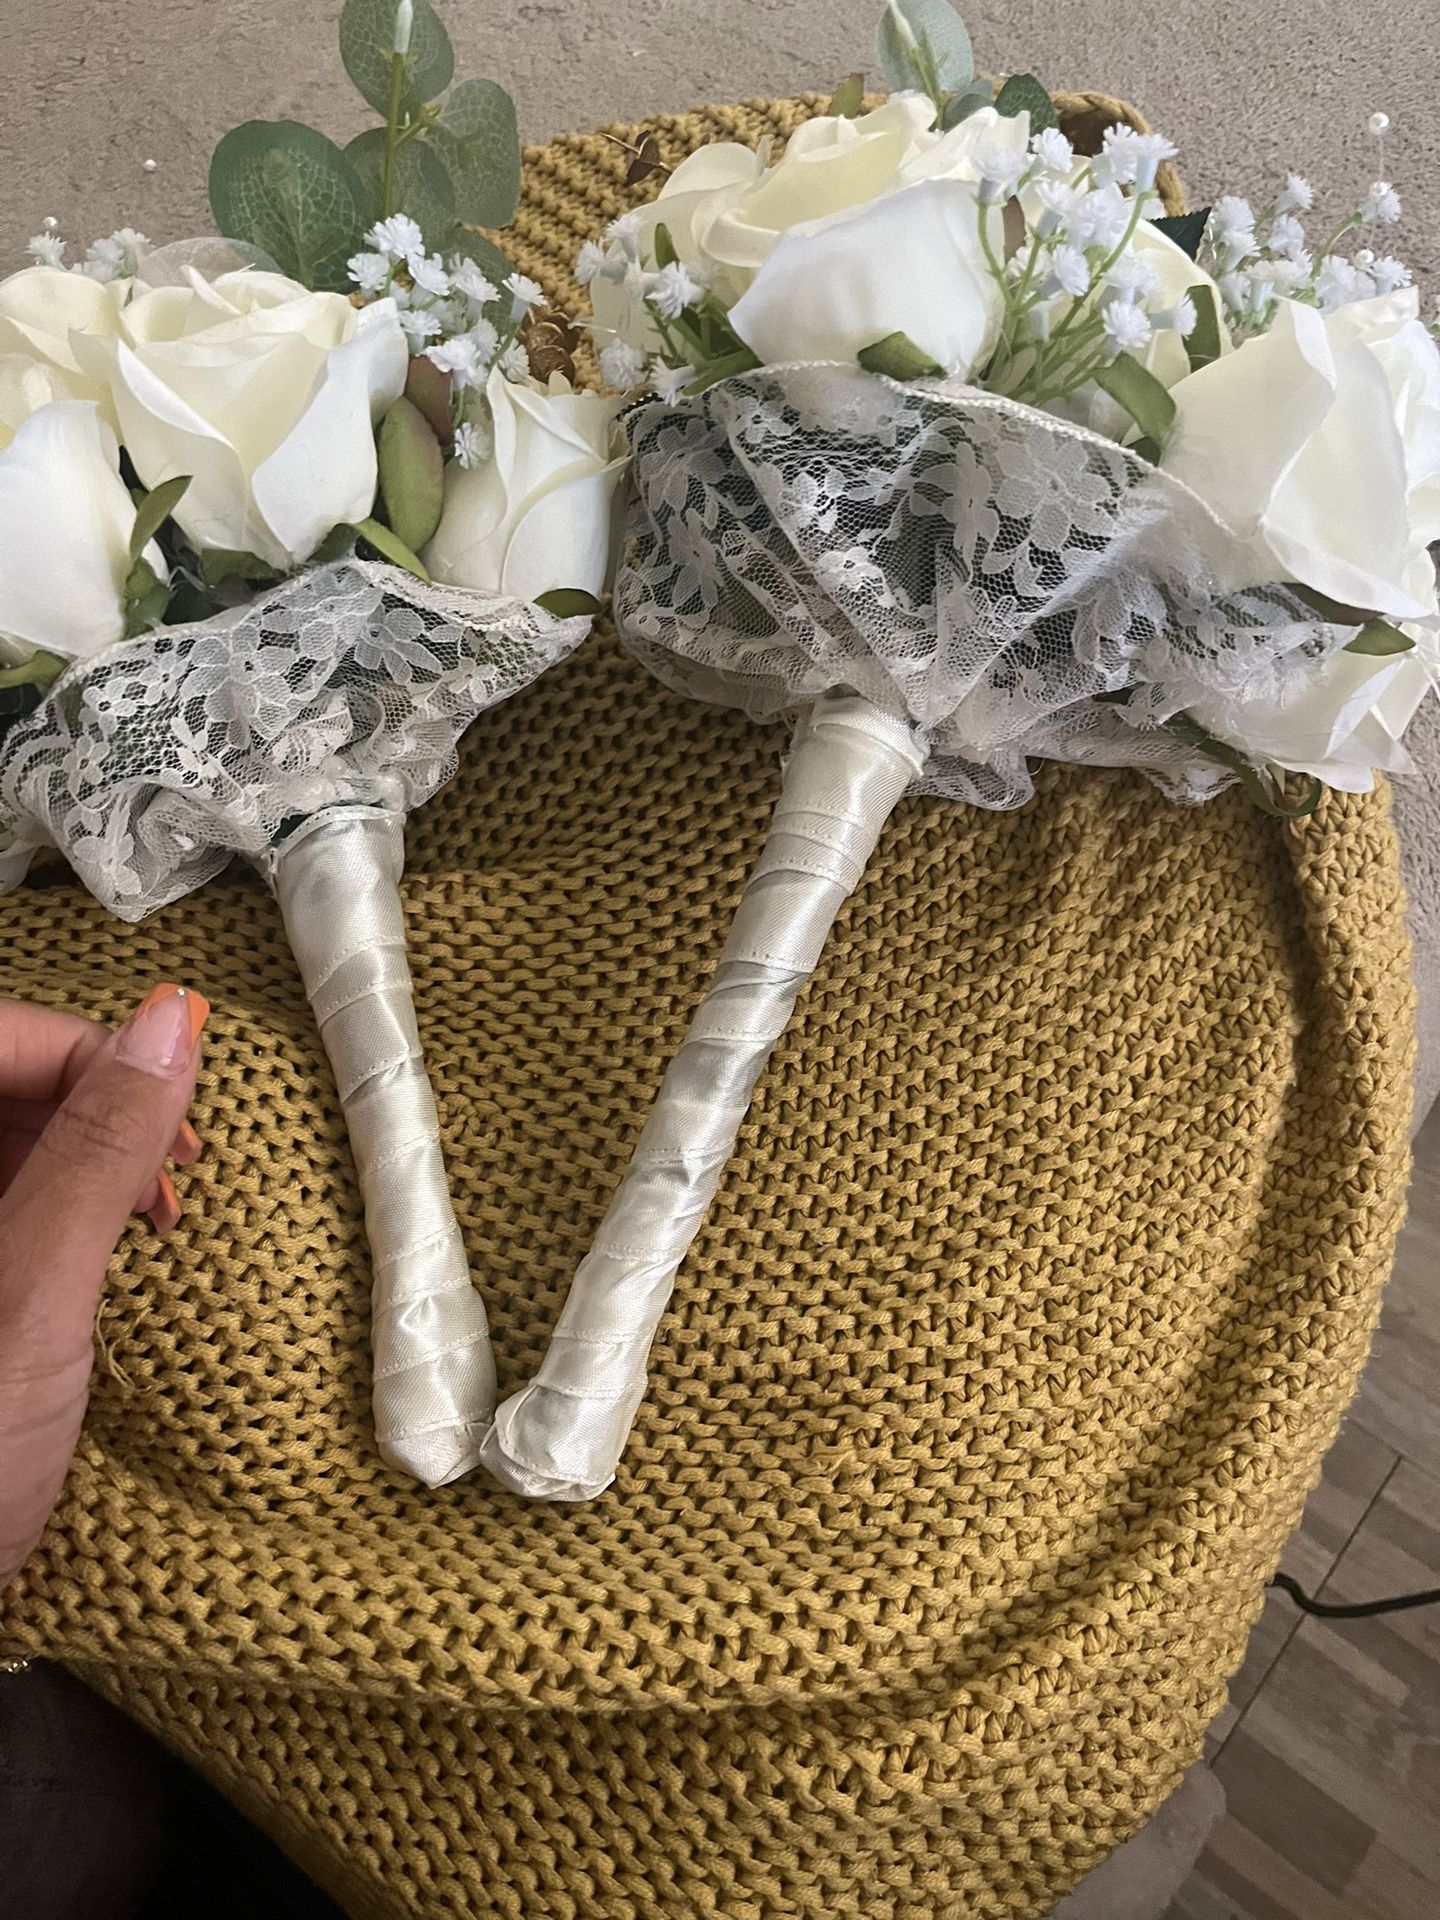 3 Handmade Bouquet Flowers For Wedding Off White Gold And White 